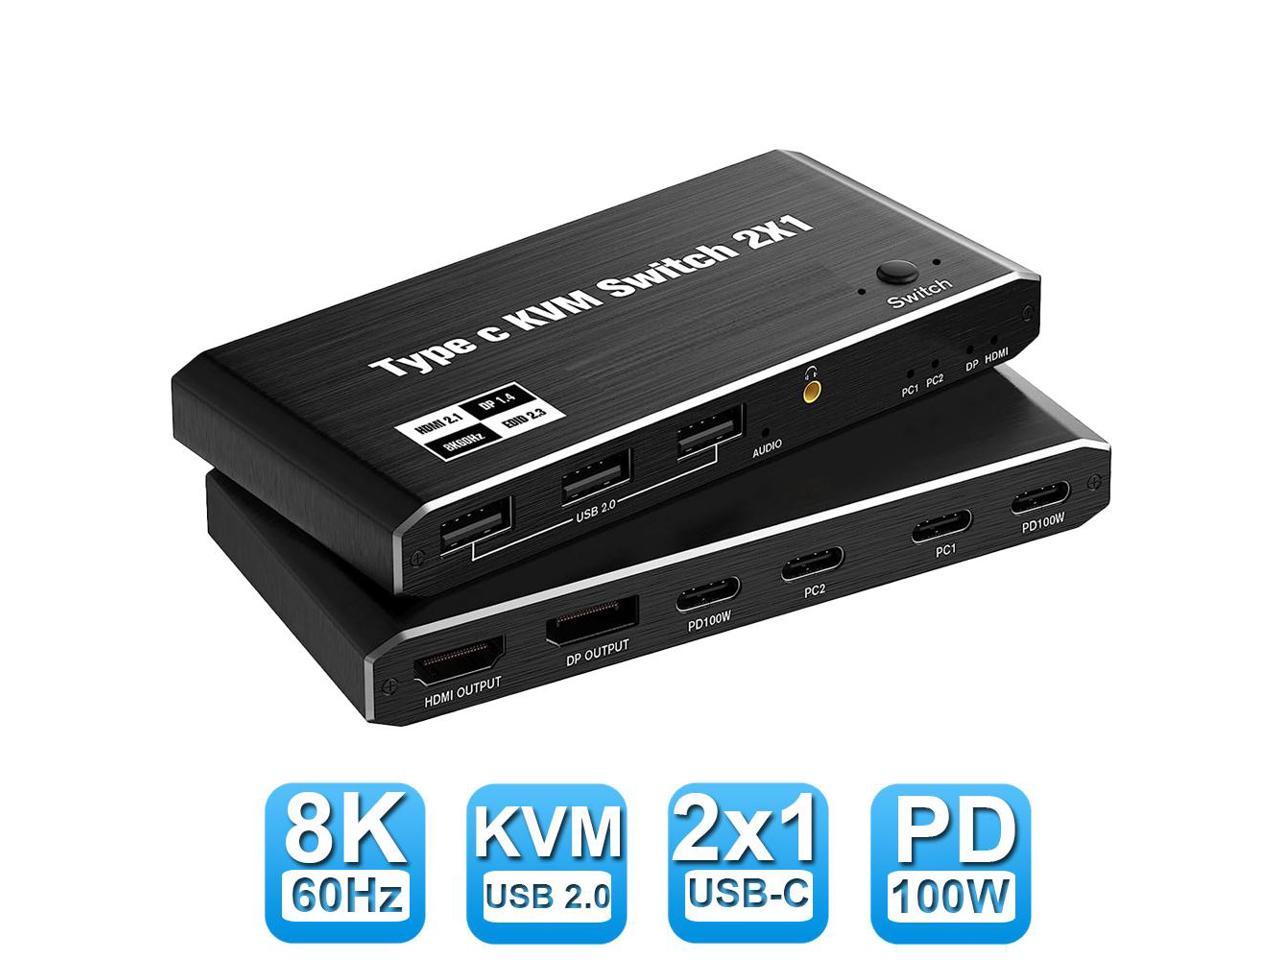 HF-HKUC2: 8K USB C KVM Switch HDMI 2 Port 8K@60Hz 4K@120Hz, HDMI 2.1 KVM Switch with and 100W Power Delivery for 2 Computers Share 1 Monitor(DP/HDMI Output) and 3 USB Devices,3.5mm Audio